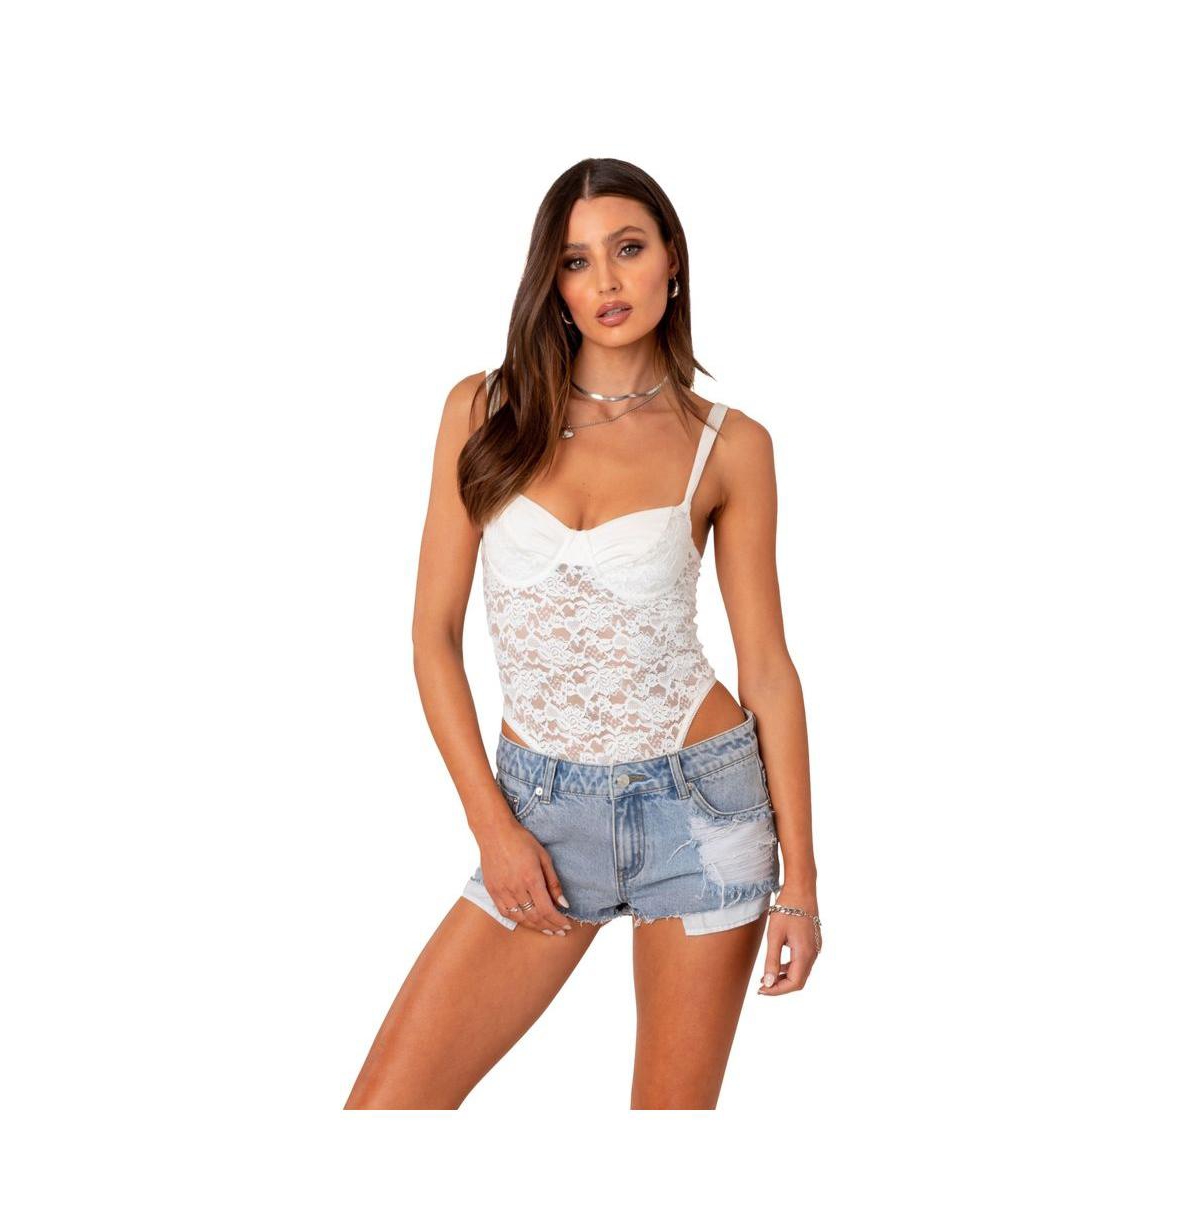 EDIKTED WOMEN'S LACE & SATIN BODYSUIT WITH CUPS